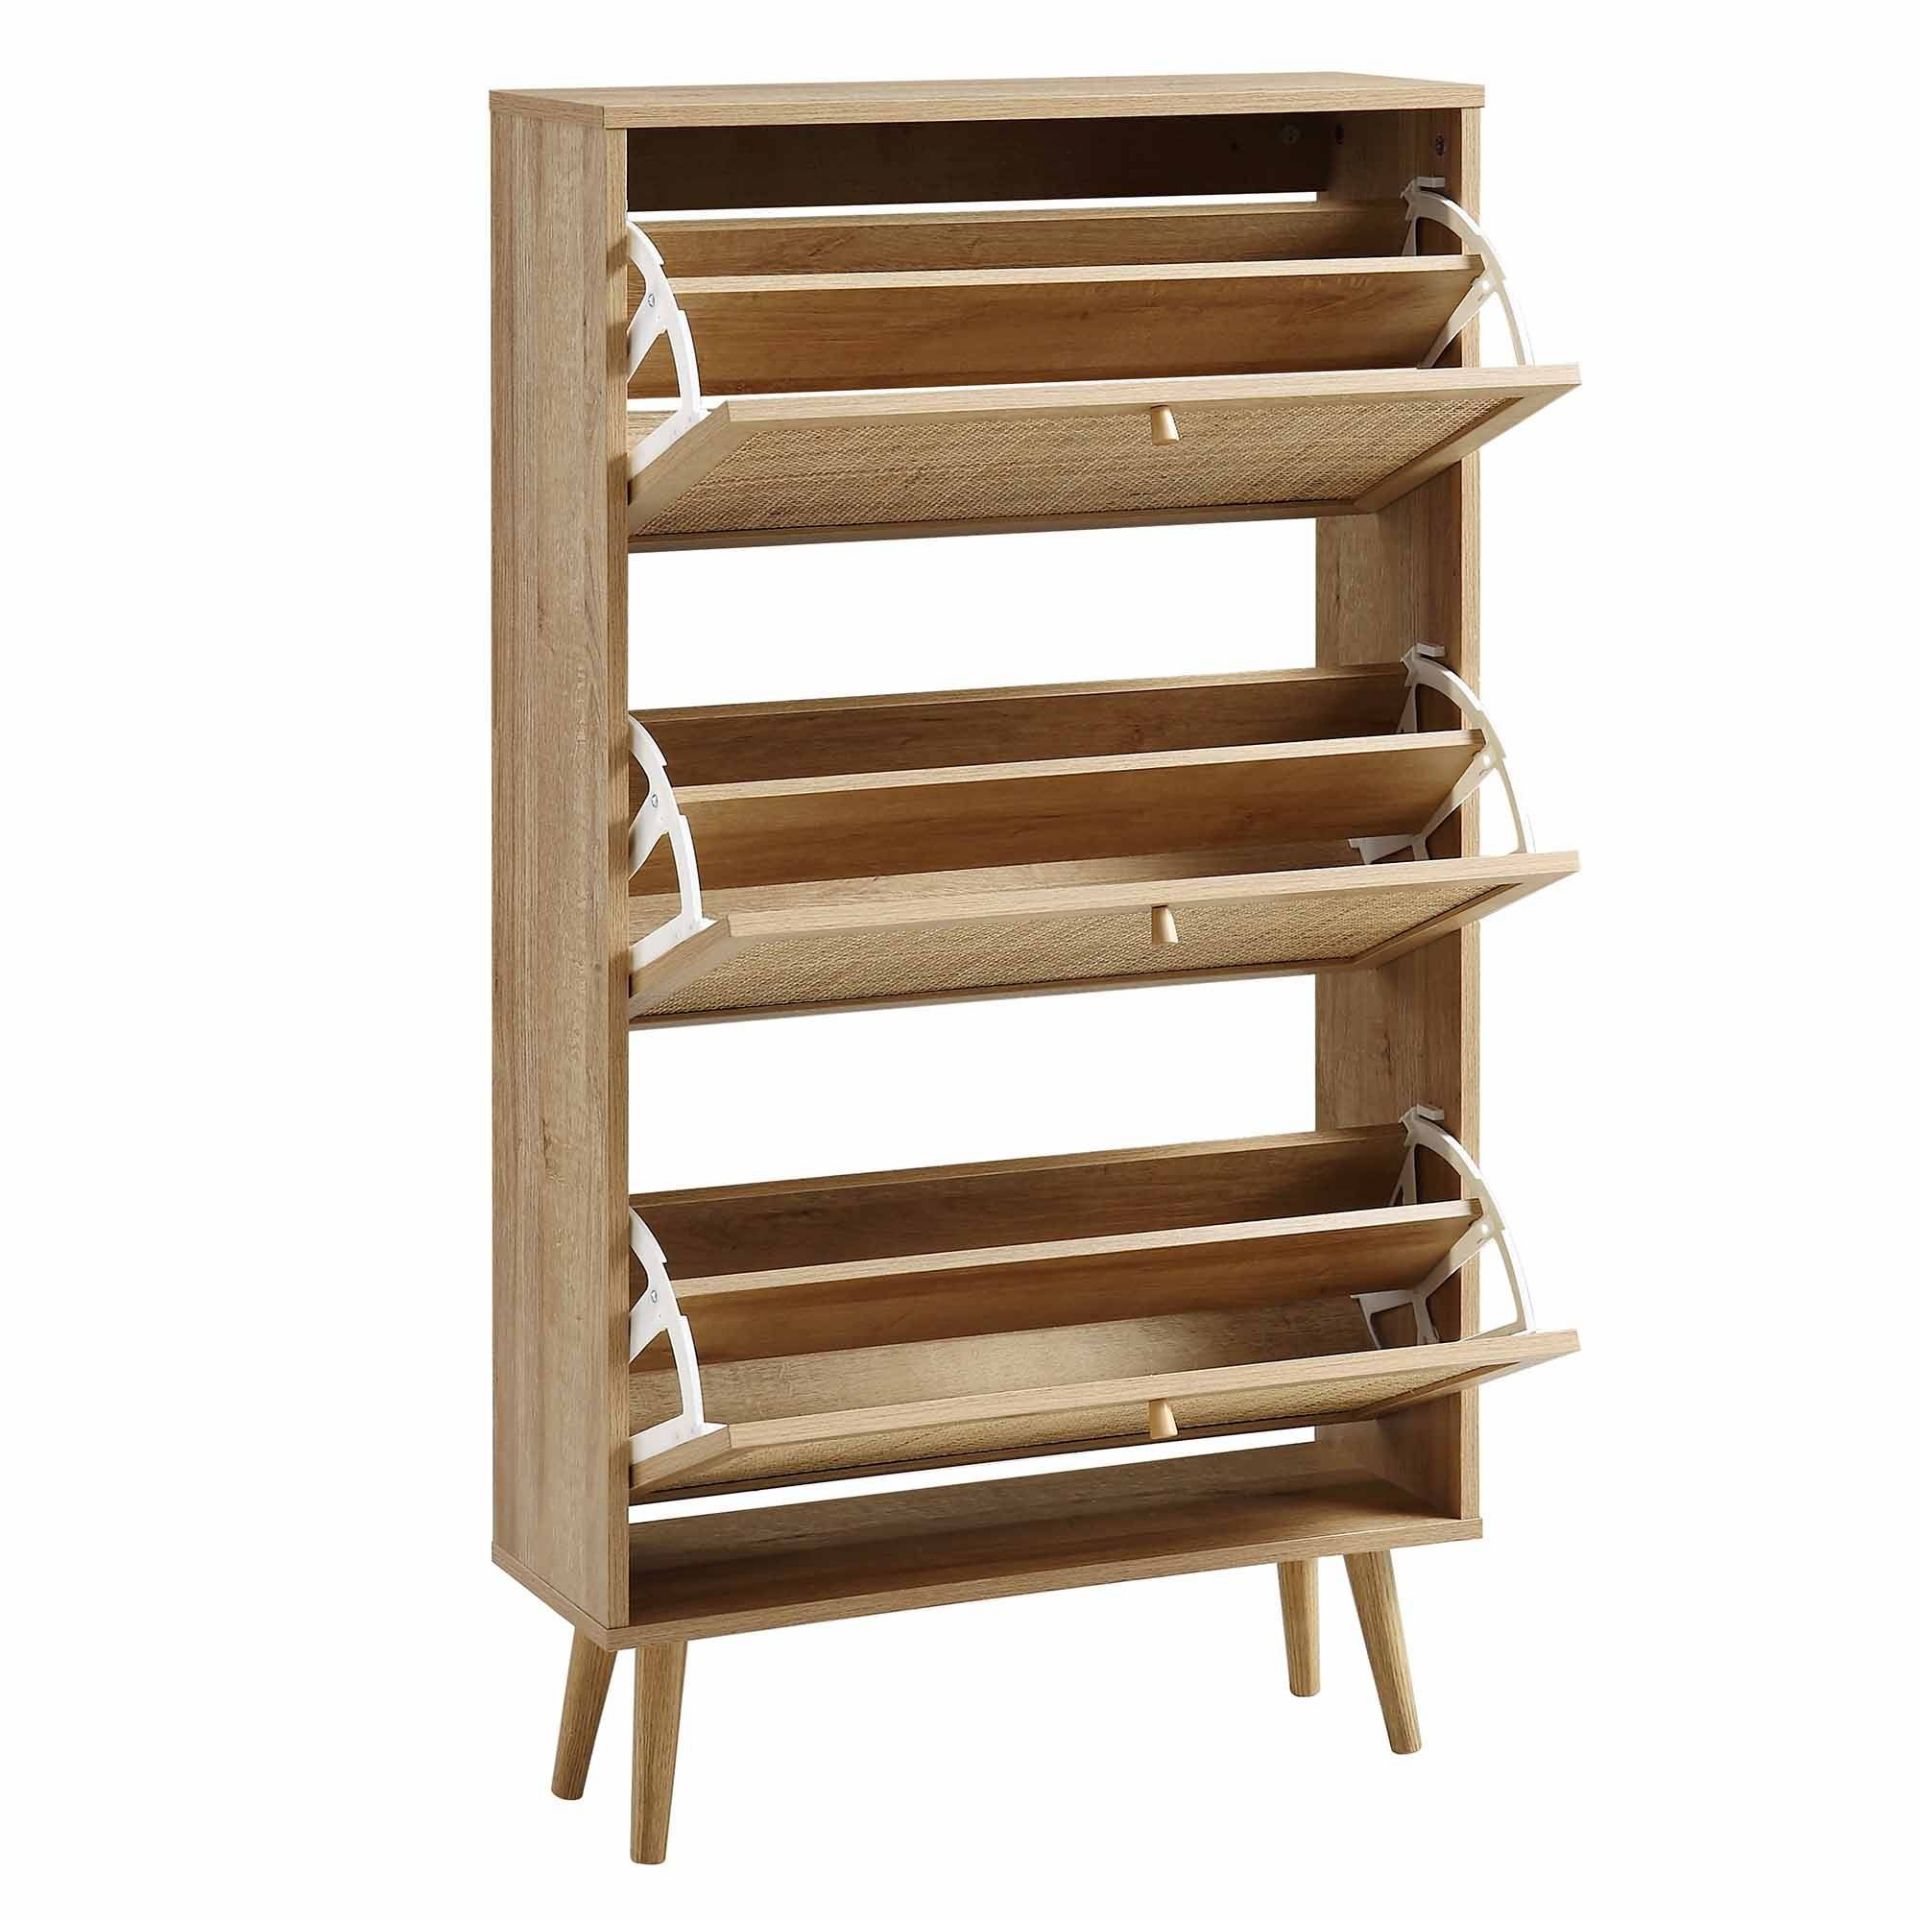 Frances Rattan 3 Tier Shoe Storage Cabinet, Natural. - R19.5. RRP £239.99. The cabinet has 3 tiers - Image 4 of 4